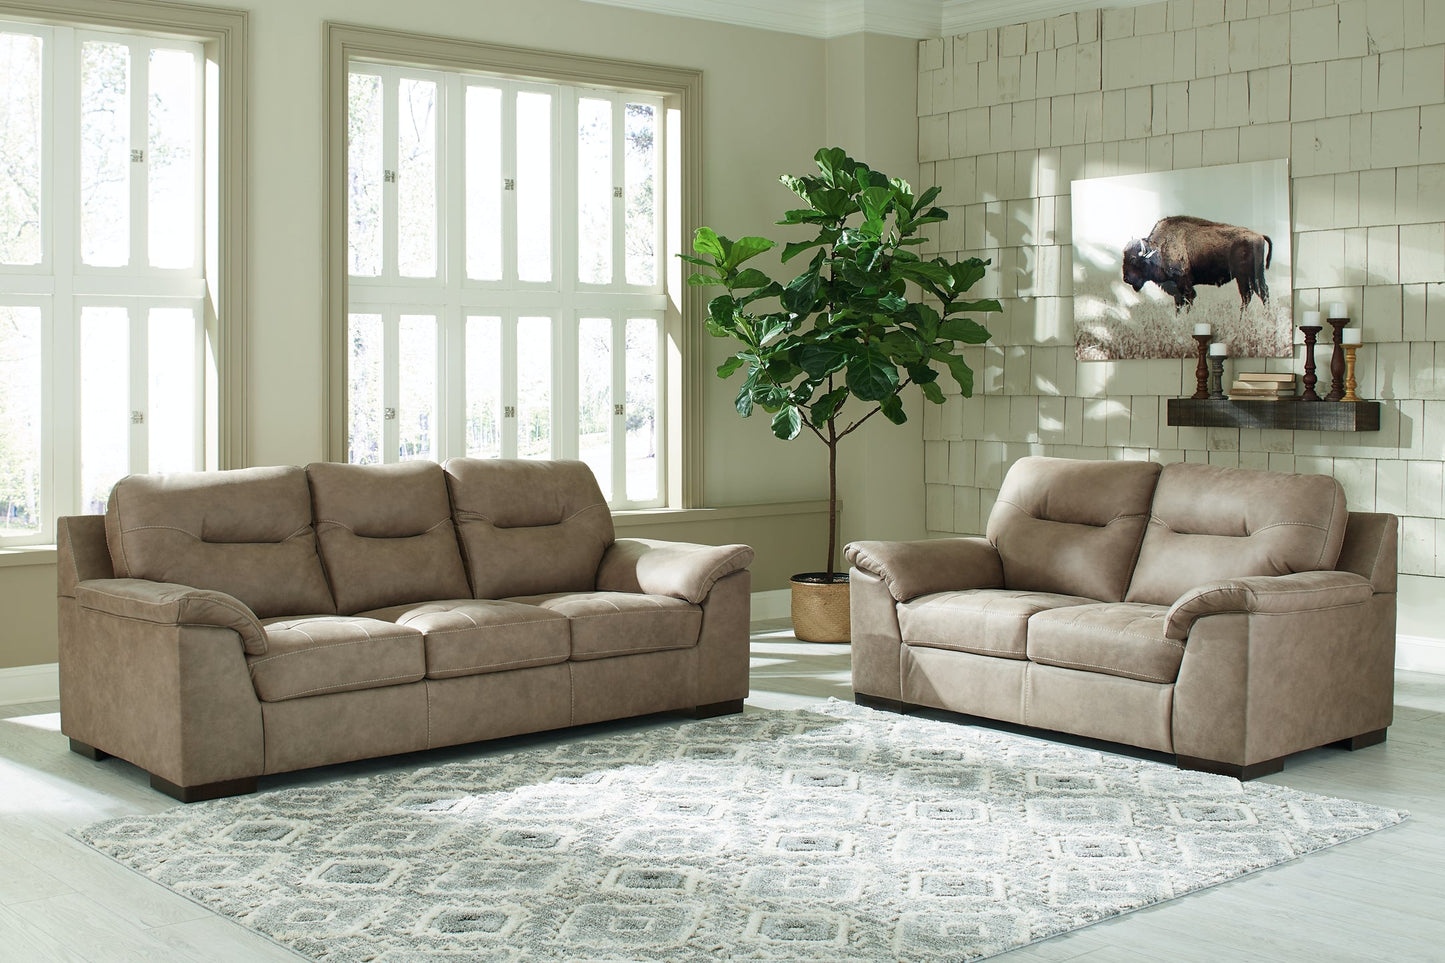 Maderla Sofa and Loveseat Rent Wise Rent To Own Jacksonville, Florida